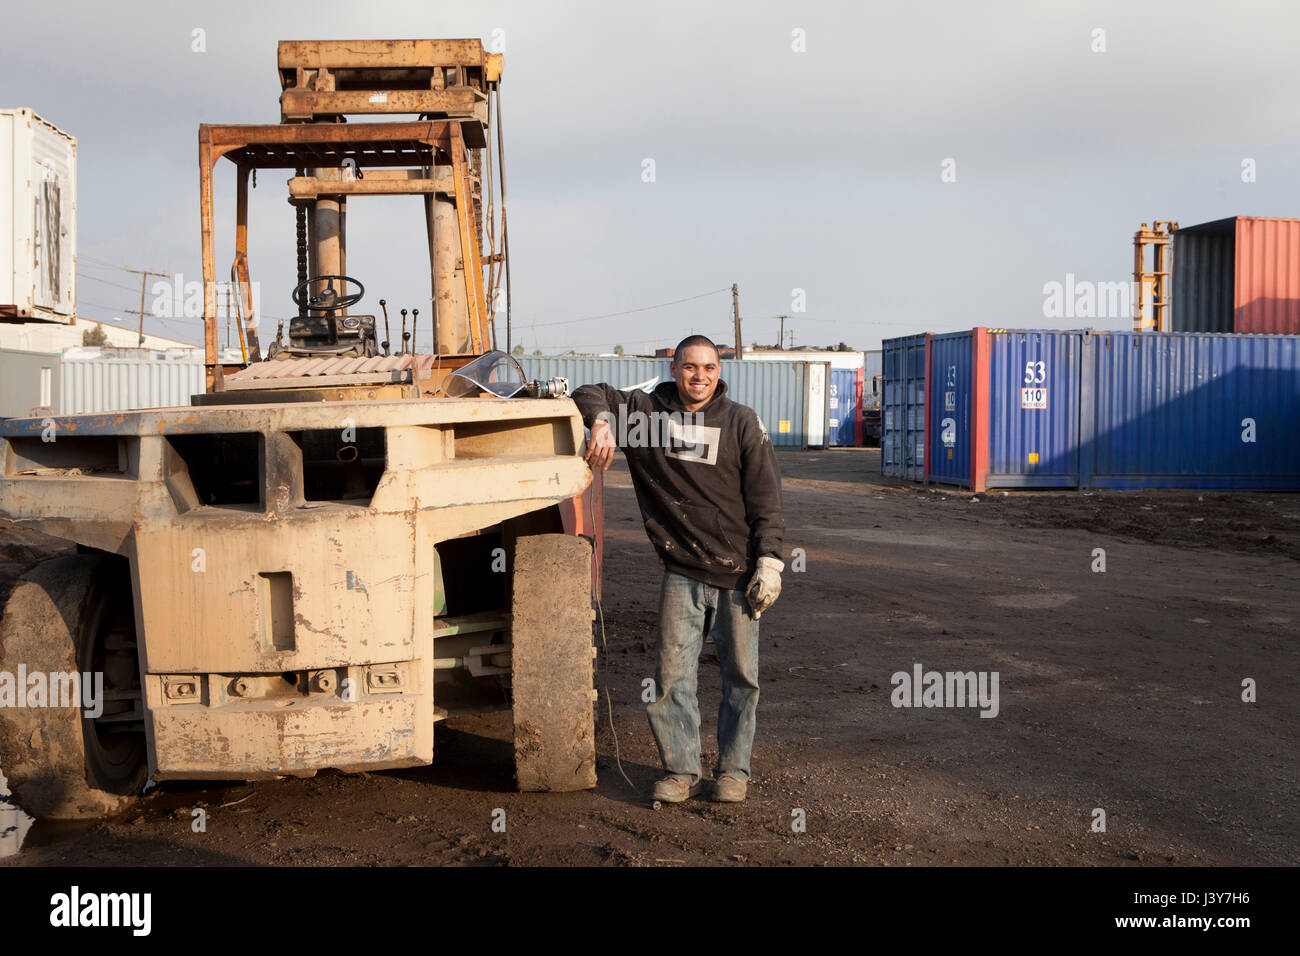 Man on construction site standing by heavy machinery Stock Photo